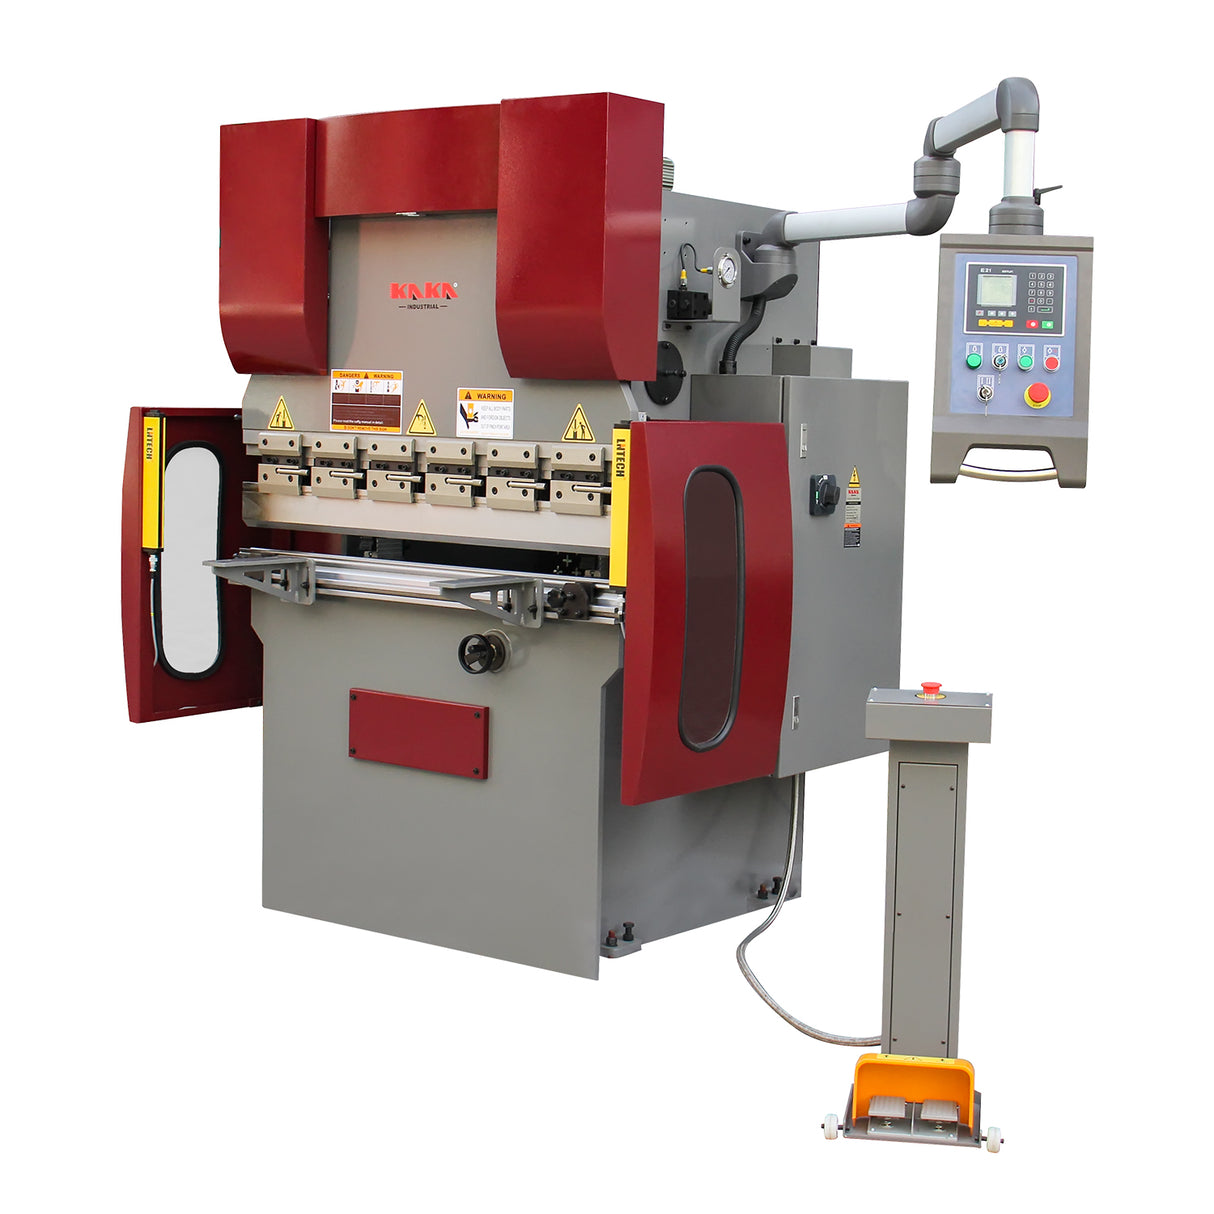 KANG INDUSTRIAL WC67Y-30/1300A, Vertical Press Brake, NC Type Bending Machine with E21 System, 415V Power